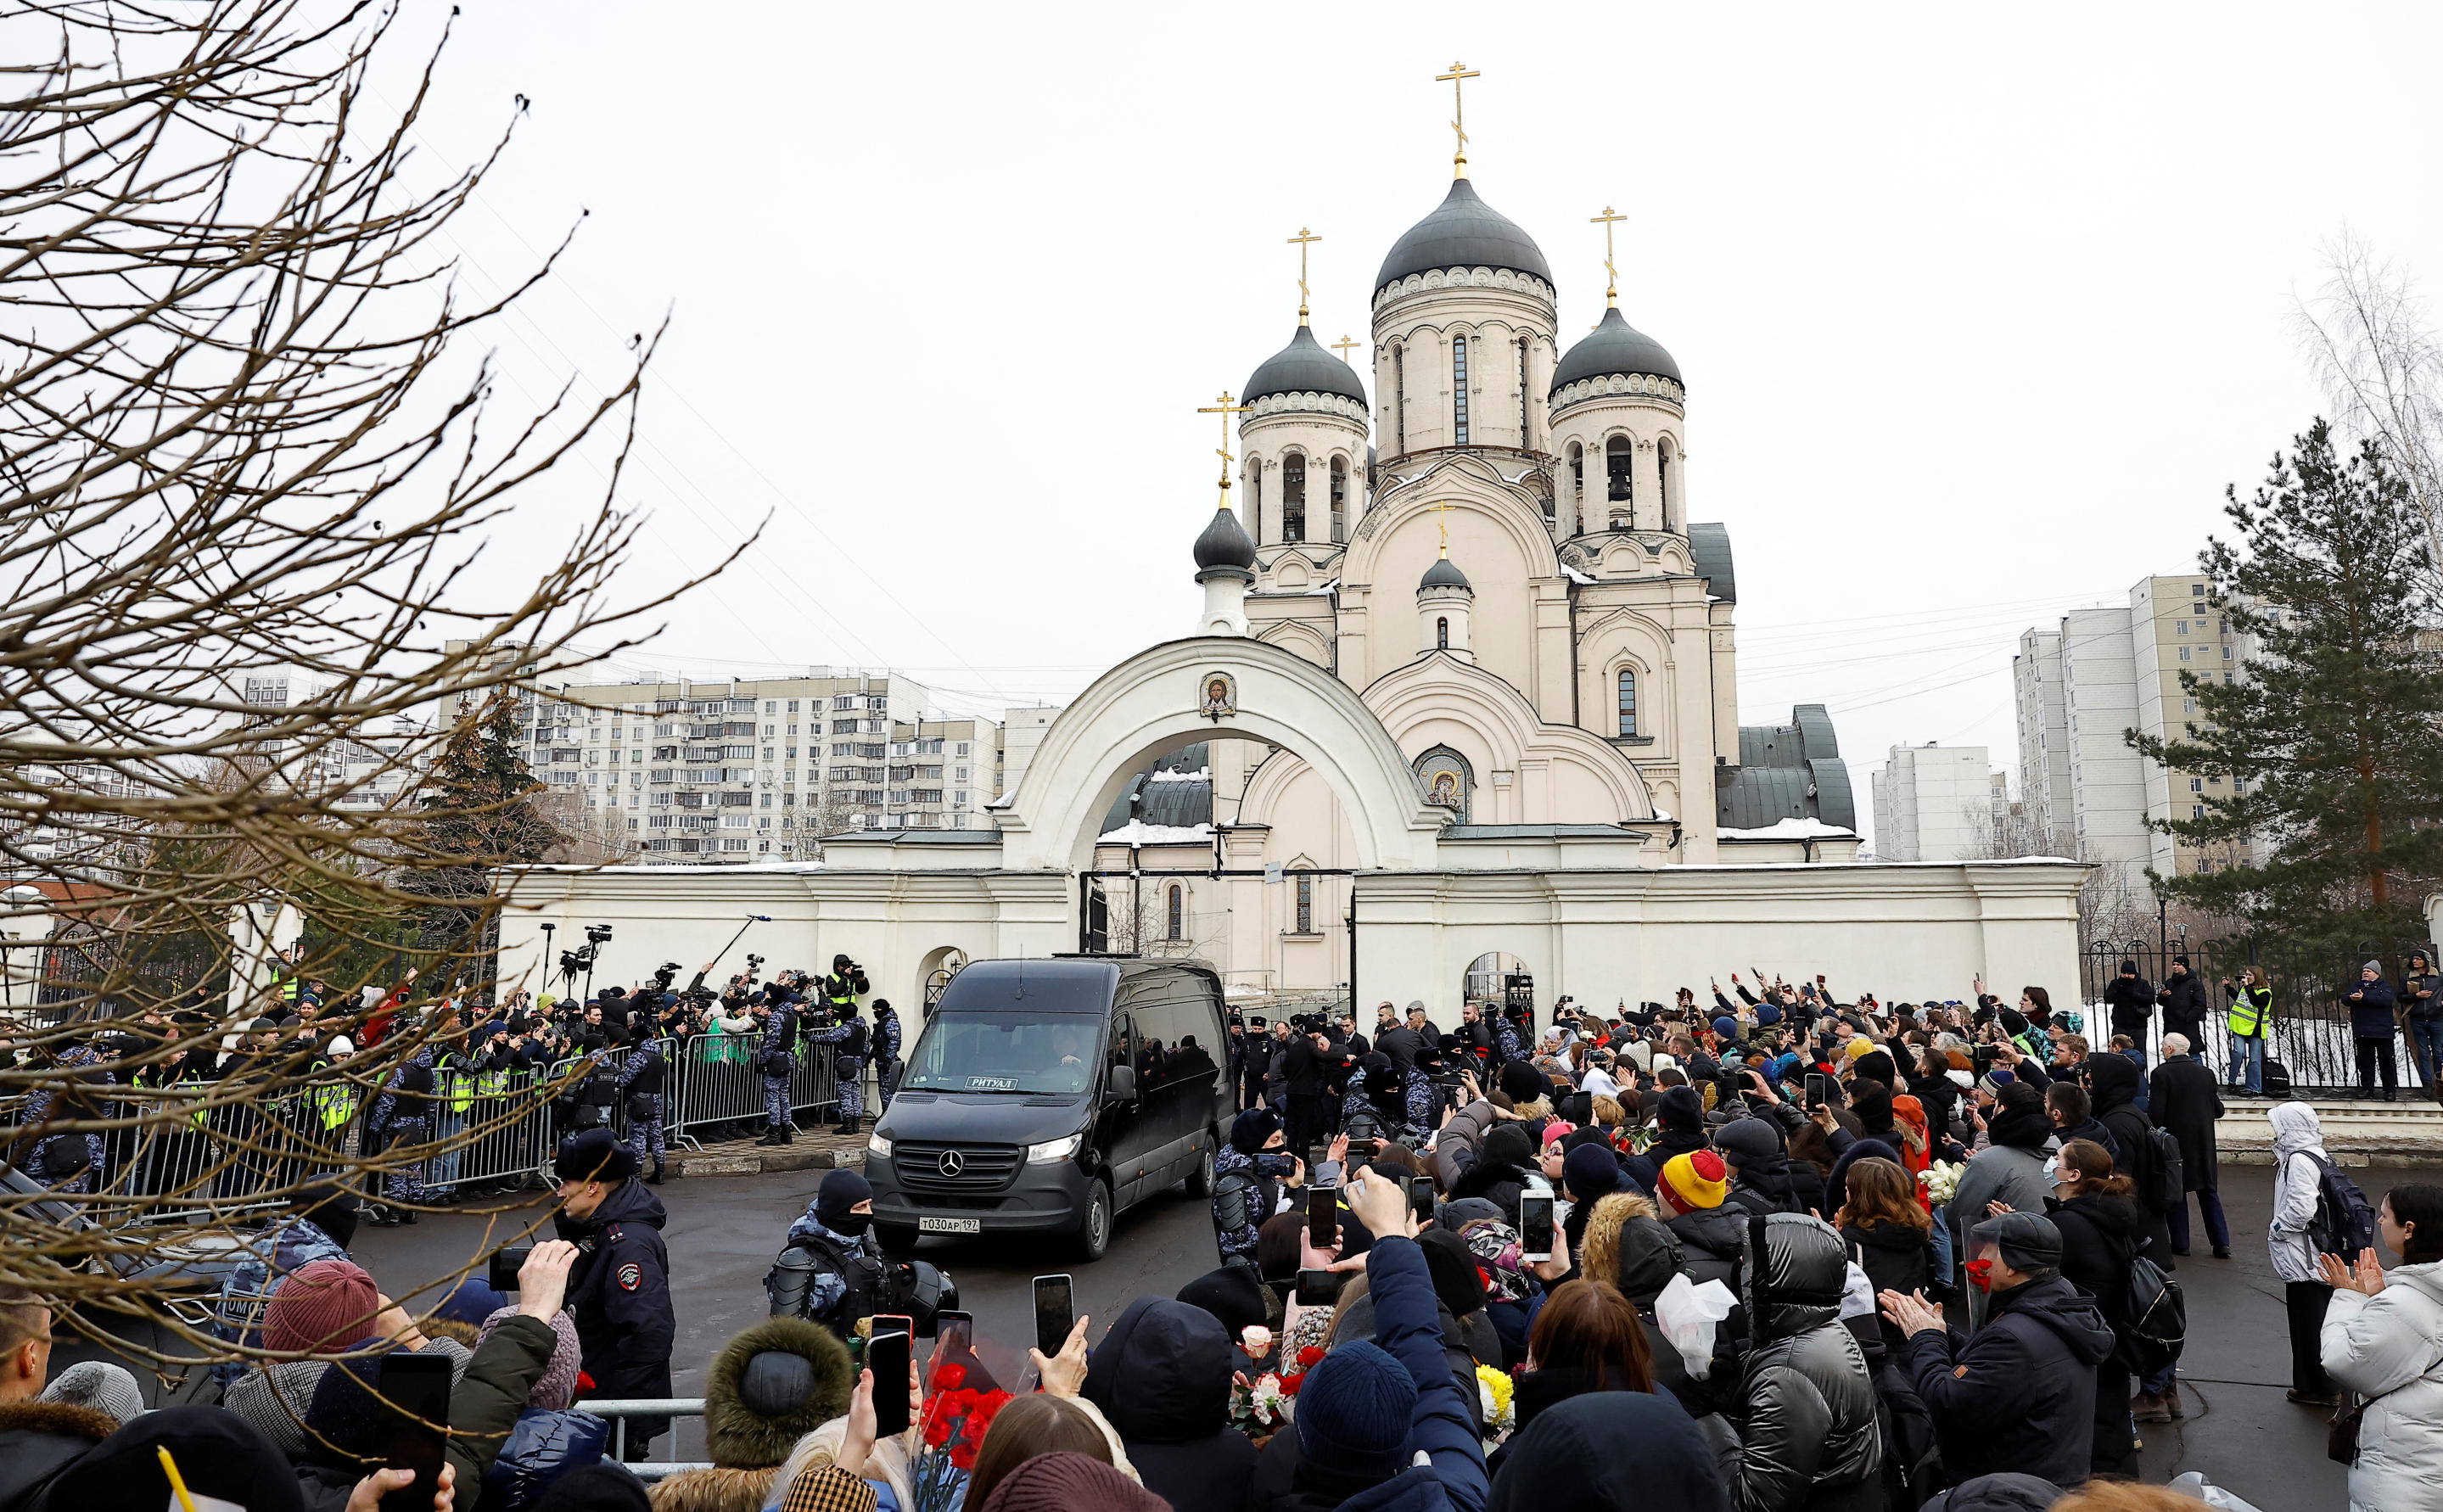 A hearse carrying Navalny's coffin is parked outside the church before the funeral.